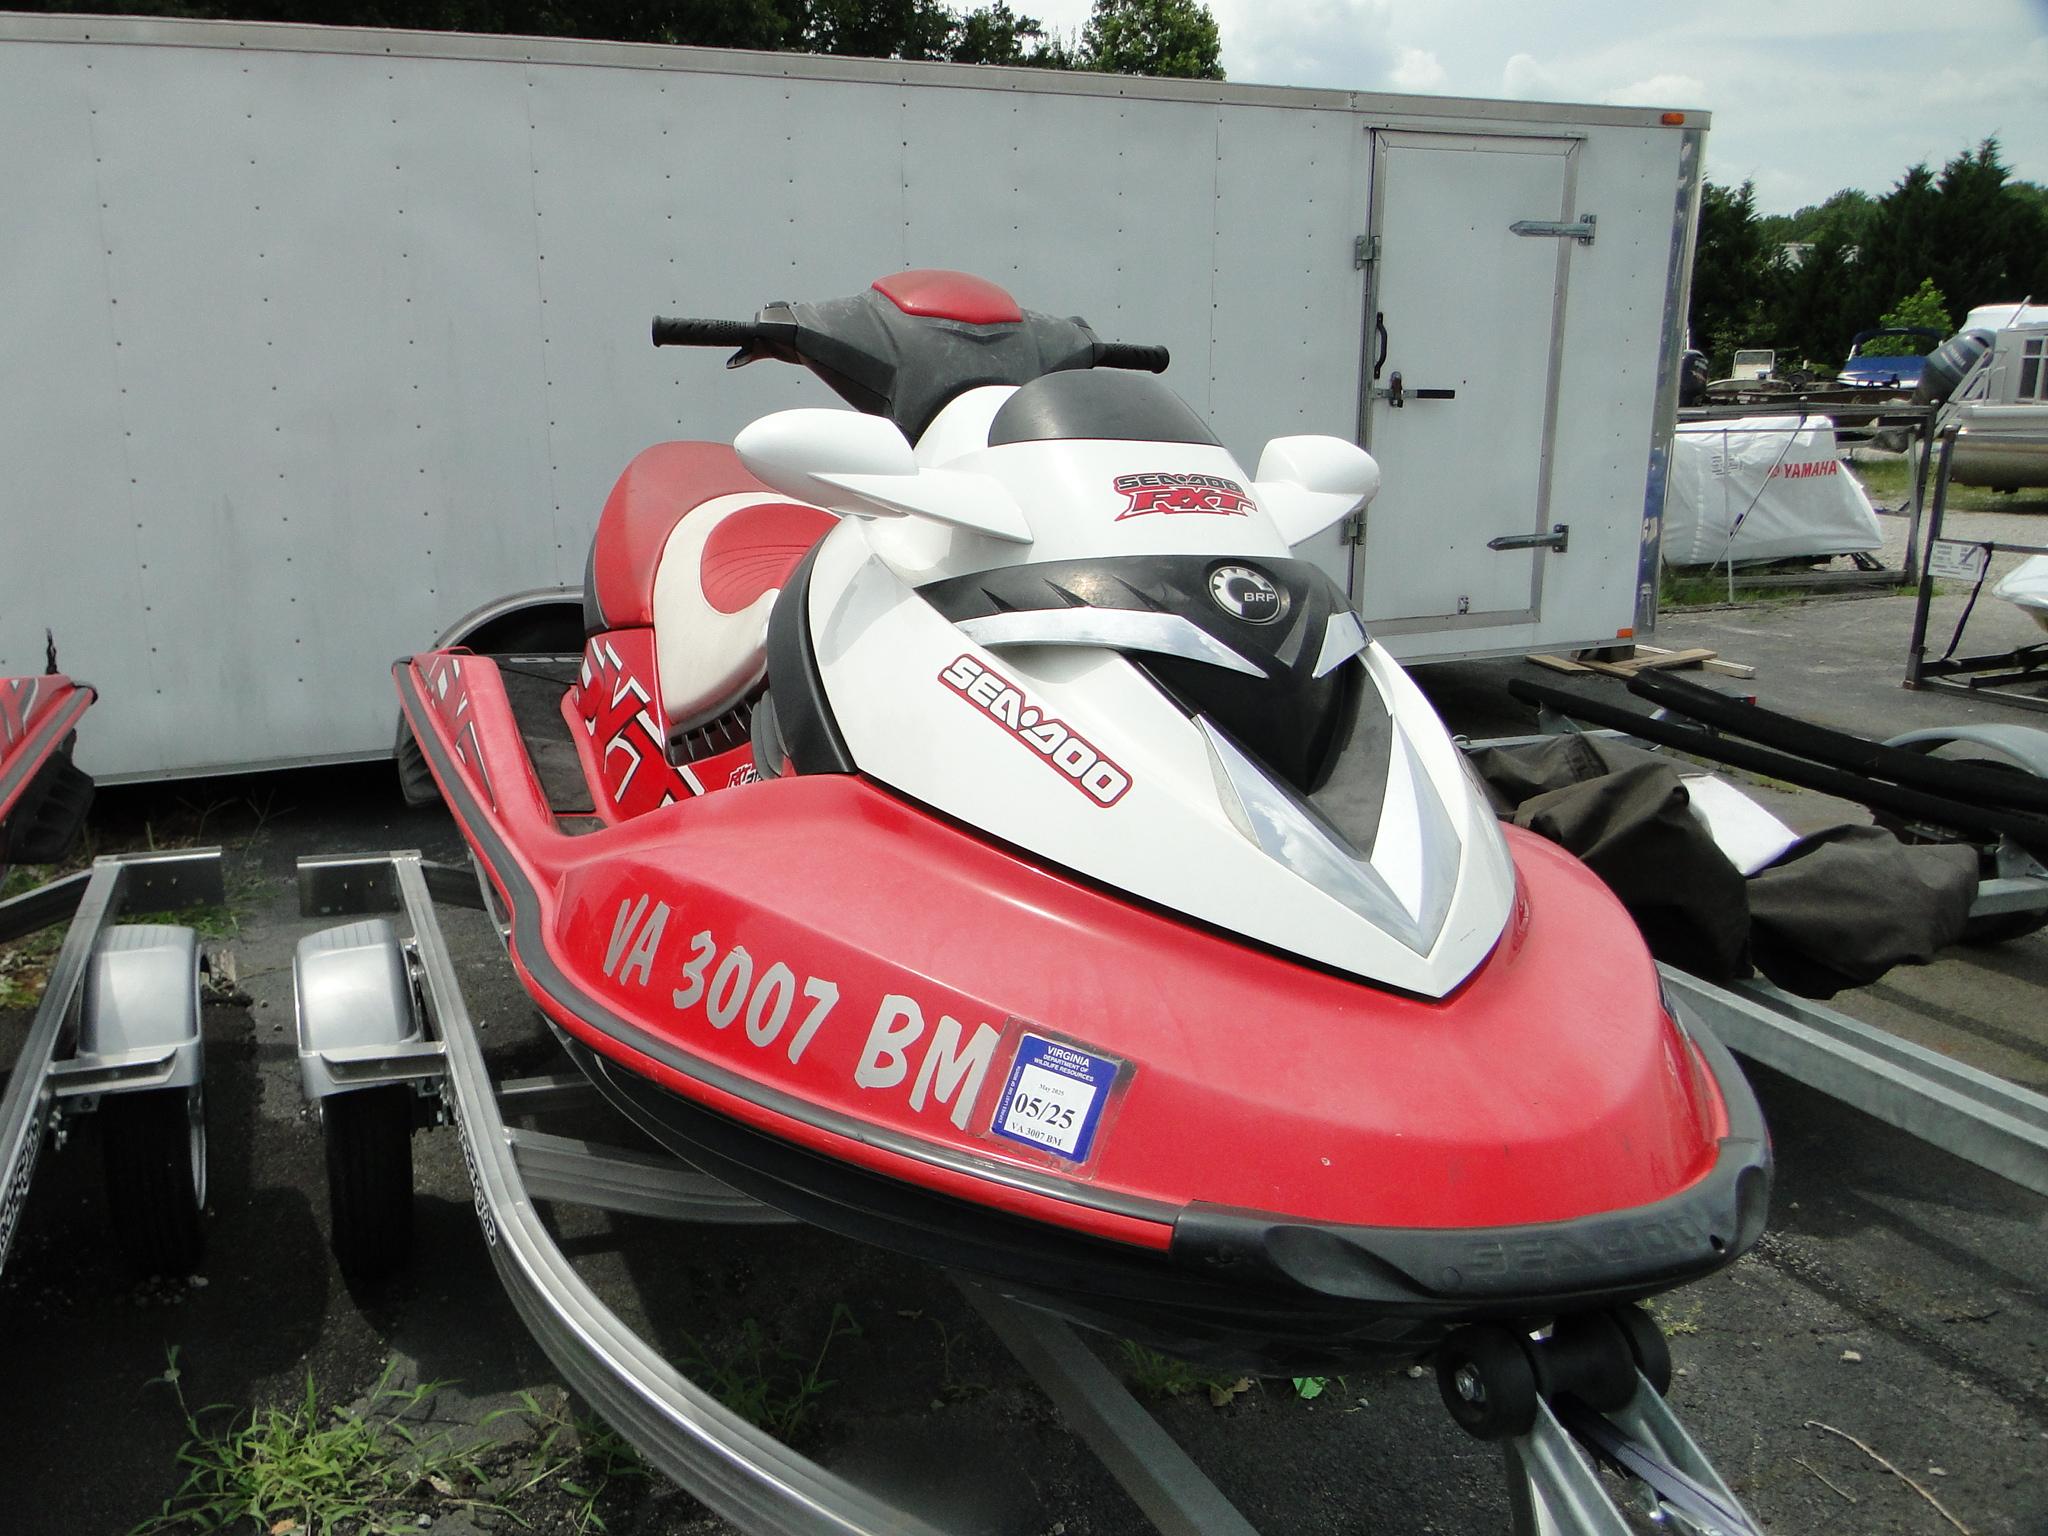 Sea-Doo Rxt 215 boats for sale - Boat Trader